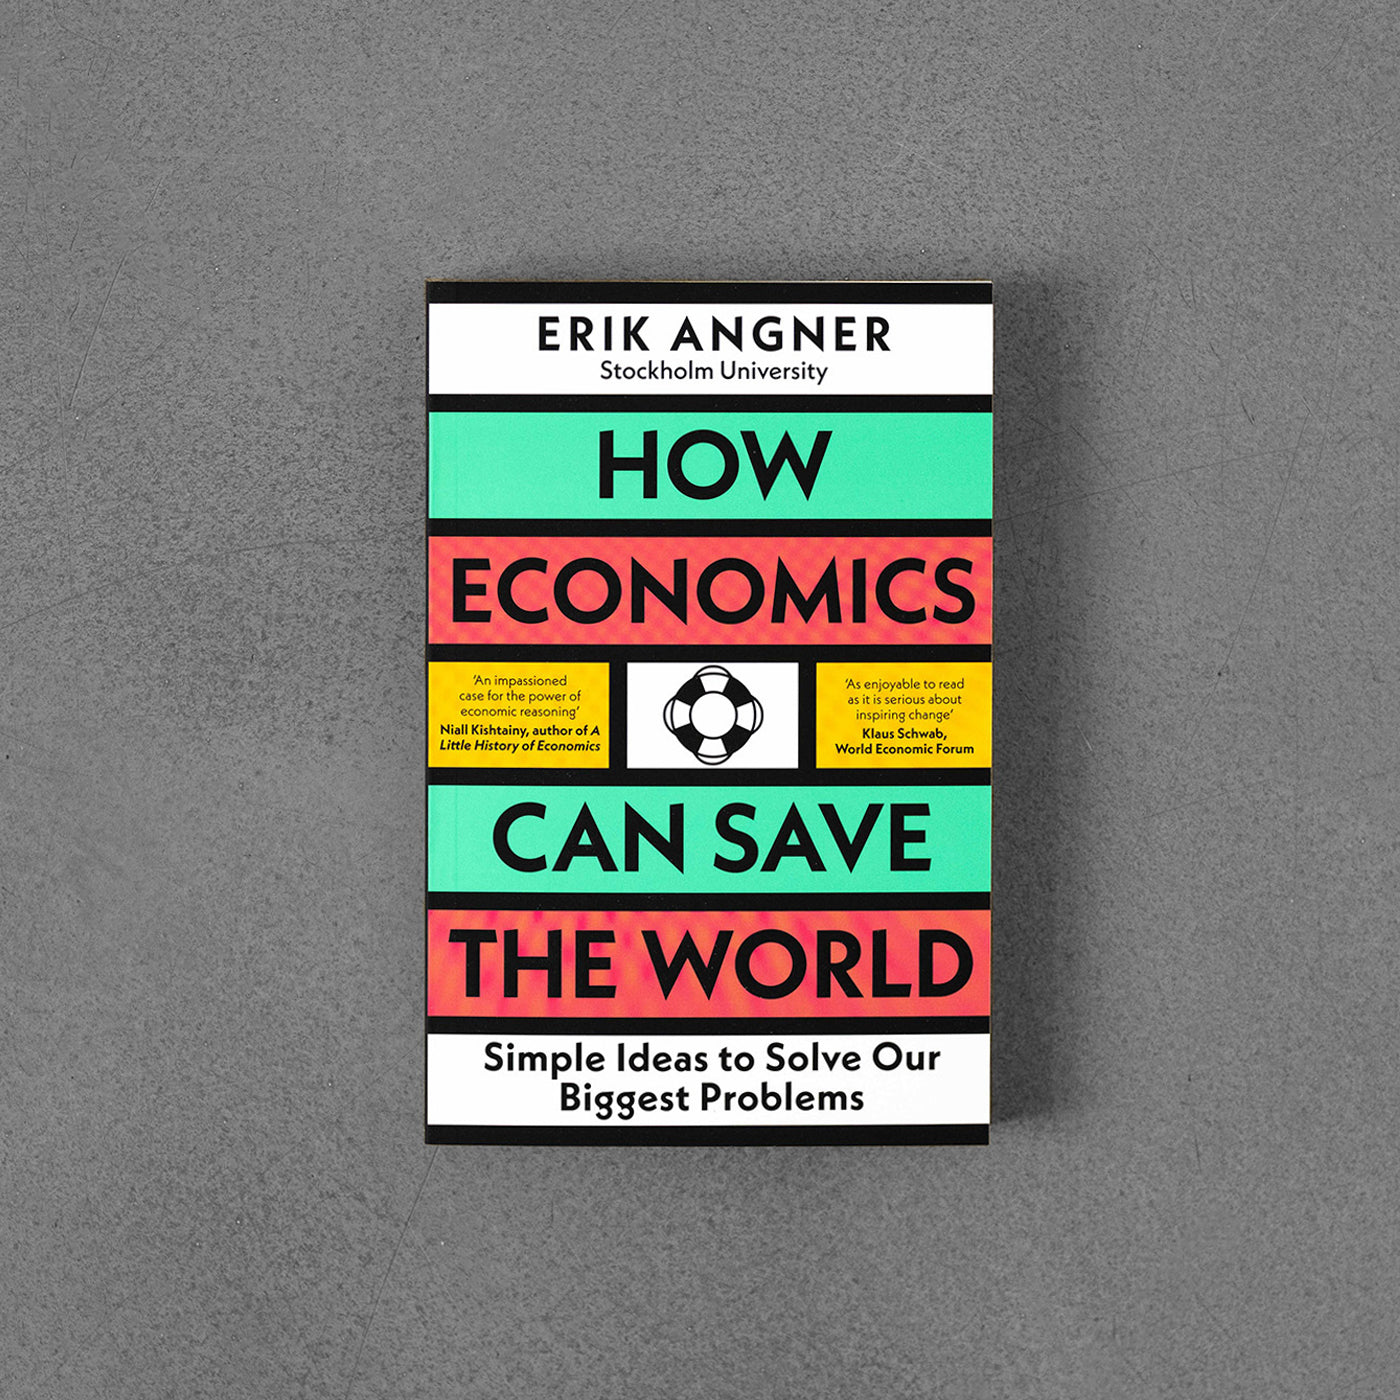 Book　How　Save　Can　–　World,　TPB　Erik　Angner　the　Economics　Therapy